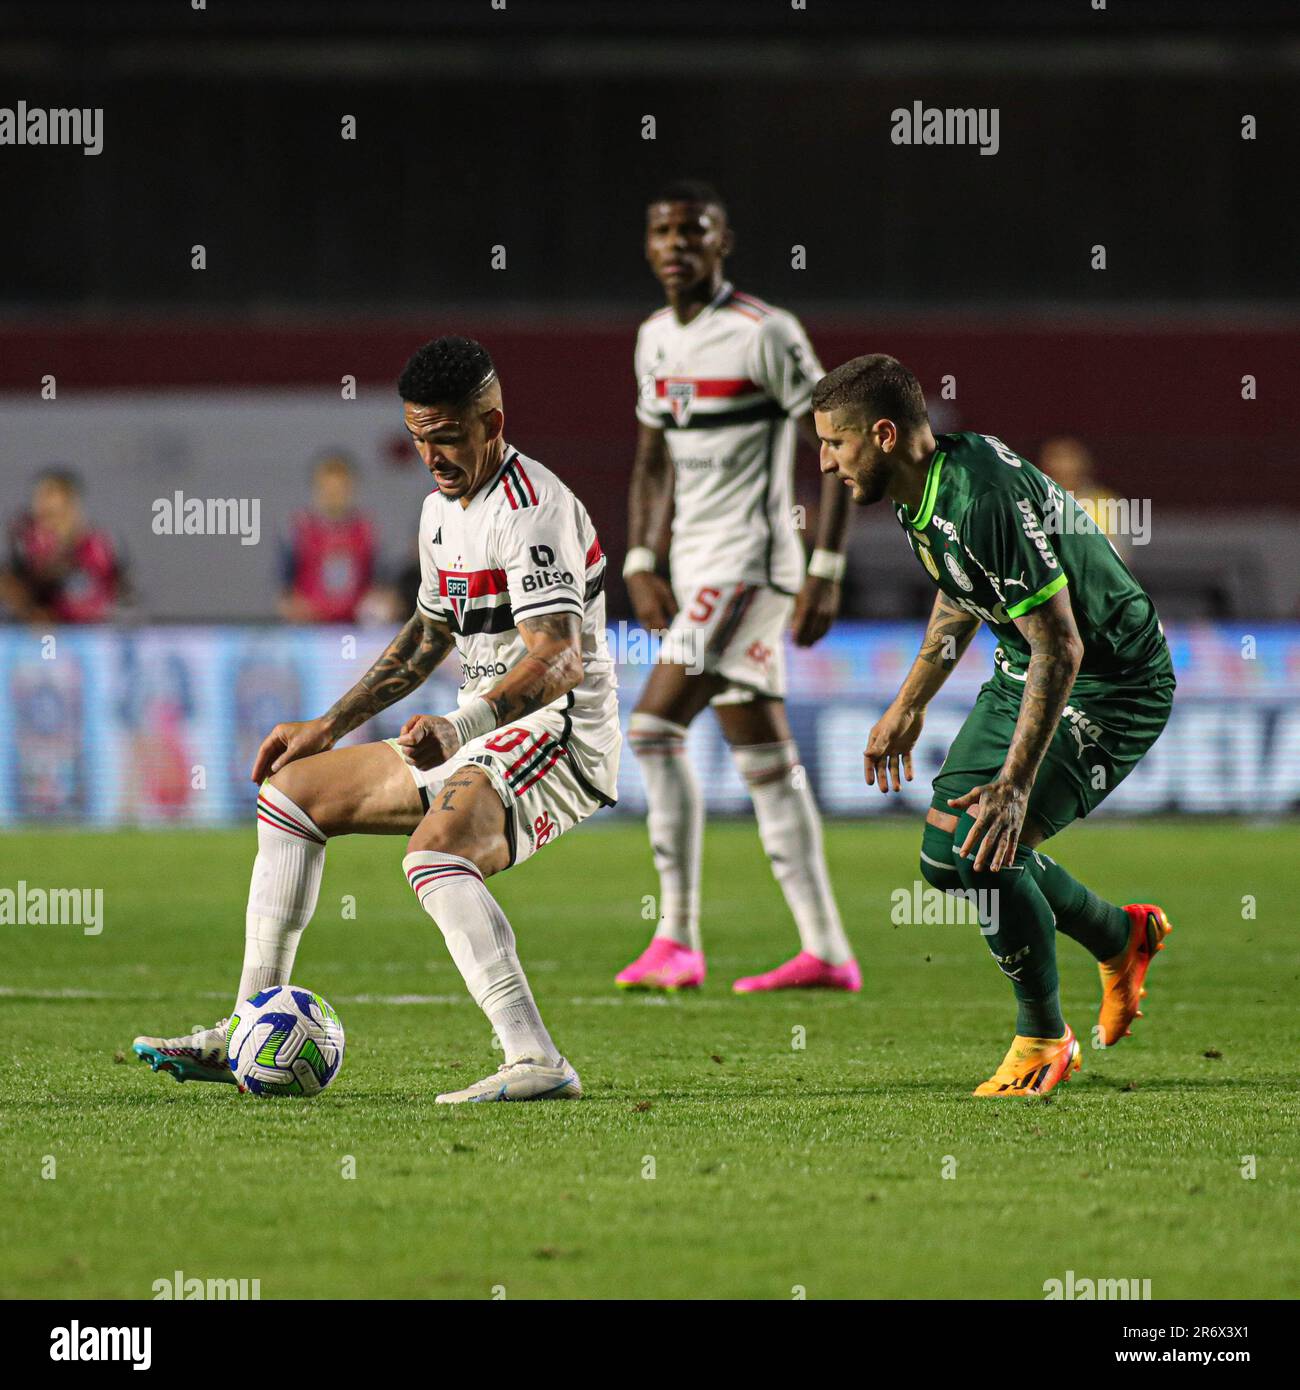 Sao Paulo, Brazil. 13th June, 2021. Luciano do Sao Paulo competes with Ze Rafael do Palmeiras, during the match between Sao Paulo and Palmeiras, for the 10th round of the 2023 Brazilian Series A Championship at Morumbi Stadium, this Sunday, 11. 30761 (Wanderson Oliveira/SPP) Credit: SPP Sport Press Photo. /Alamy Live News Stock Photo